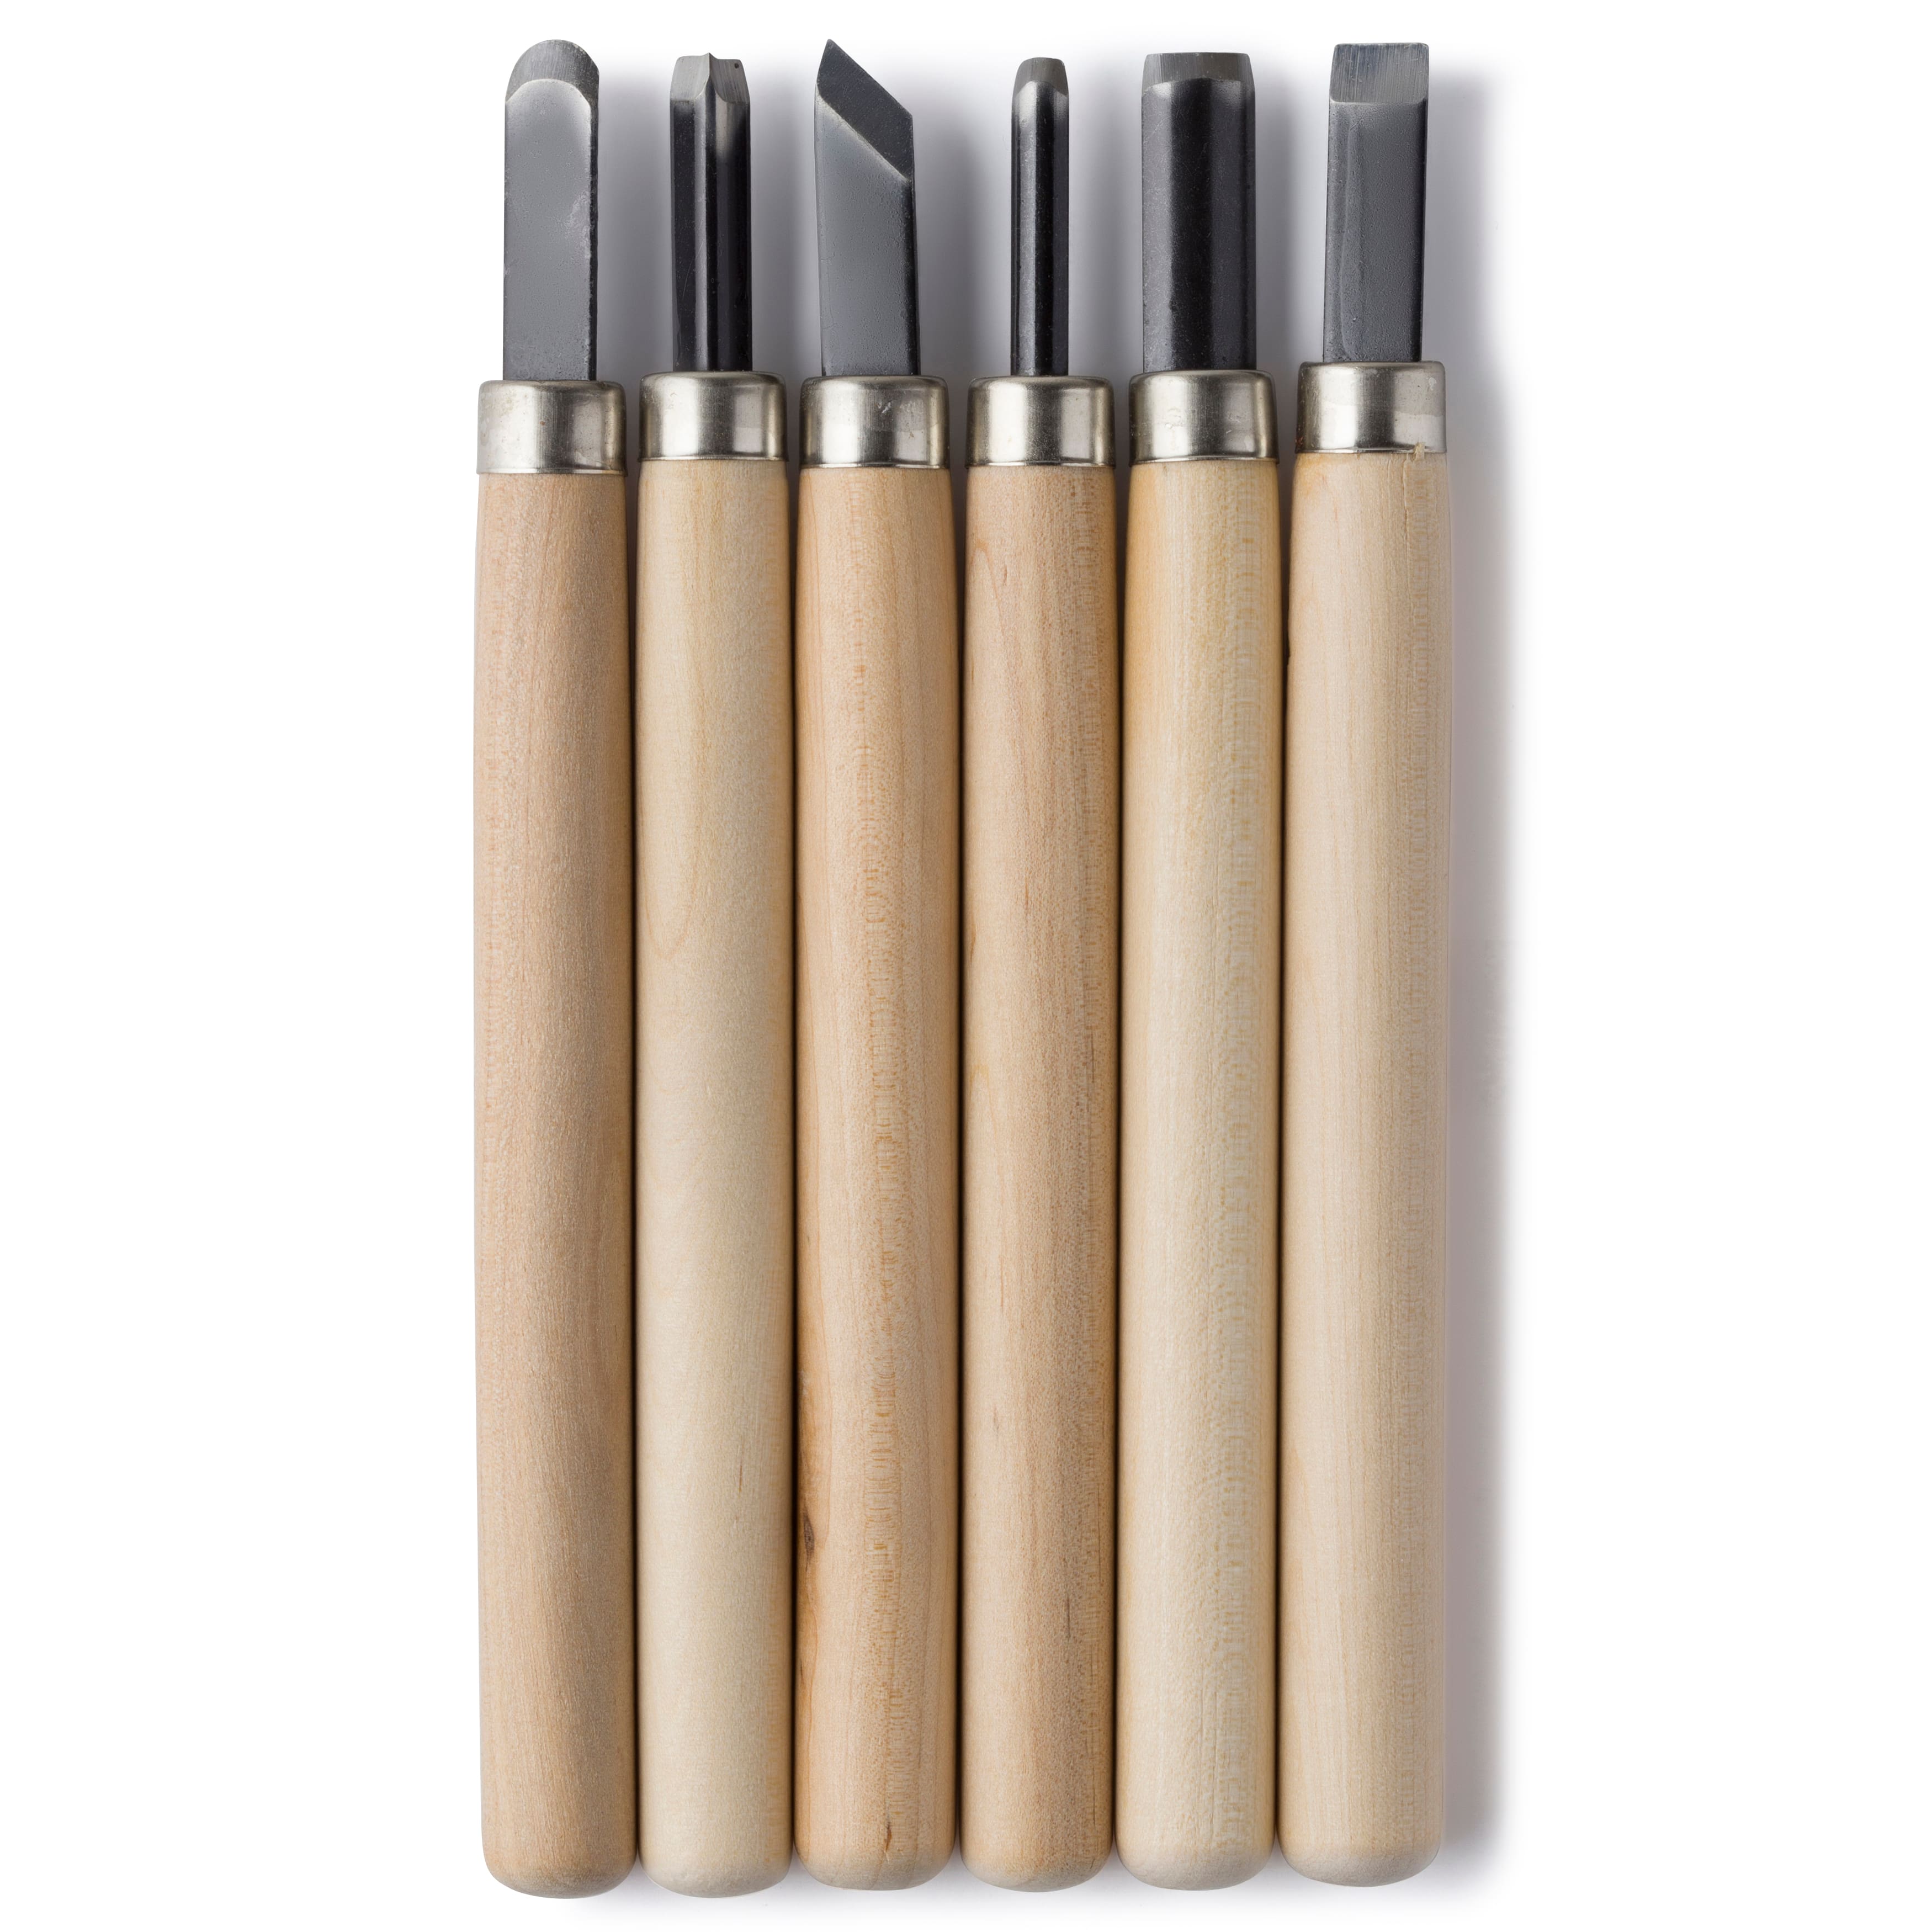 6 Packs: 6 ct. (36 total) Wood Carving Knife Set by ArtMinds&#x2122;